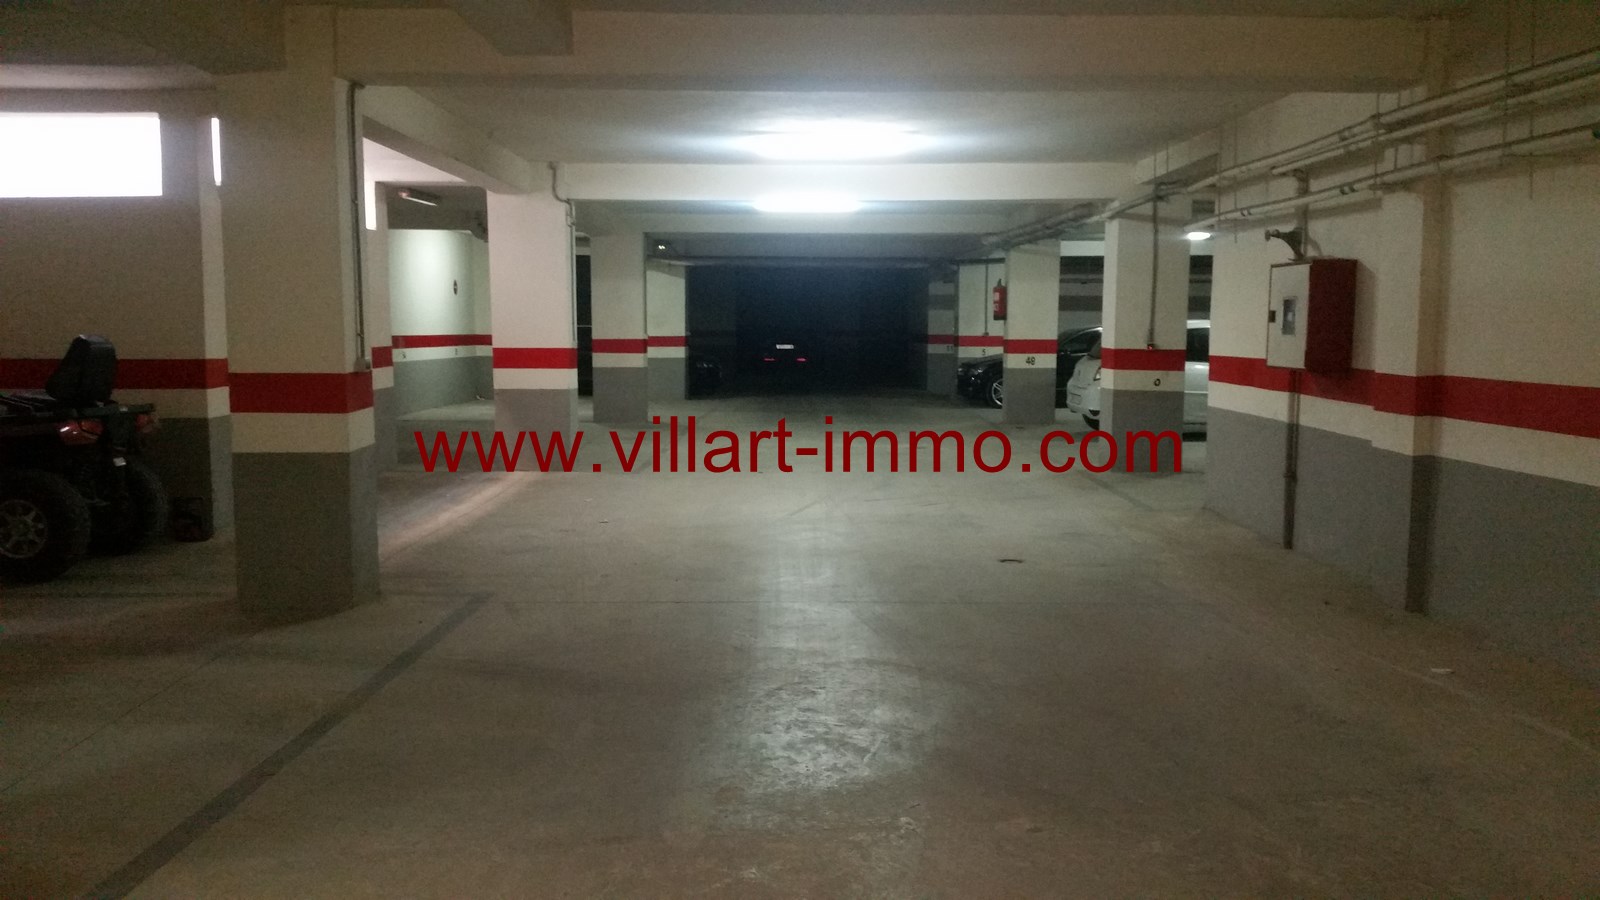 3-a-vendre-tager-place-de-parking-3-anejma-vp423-villart-immo-agence-immobiliere